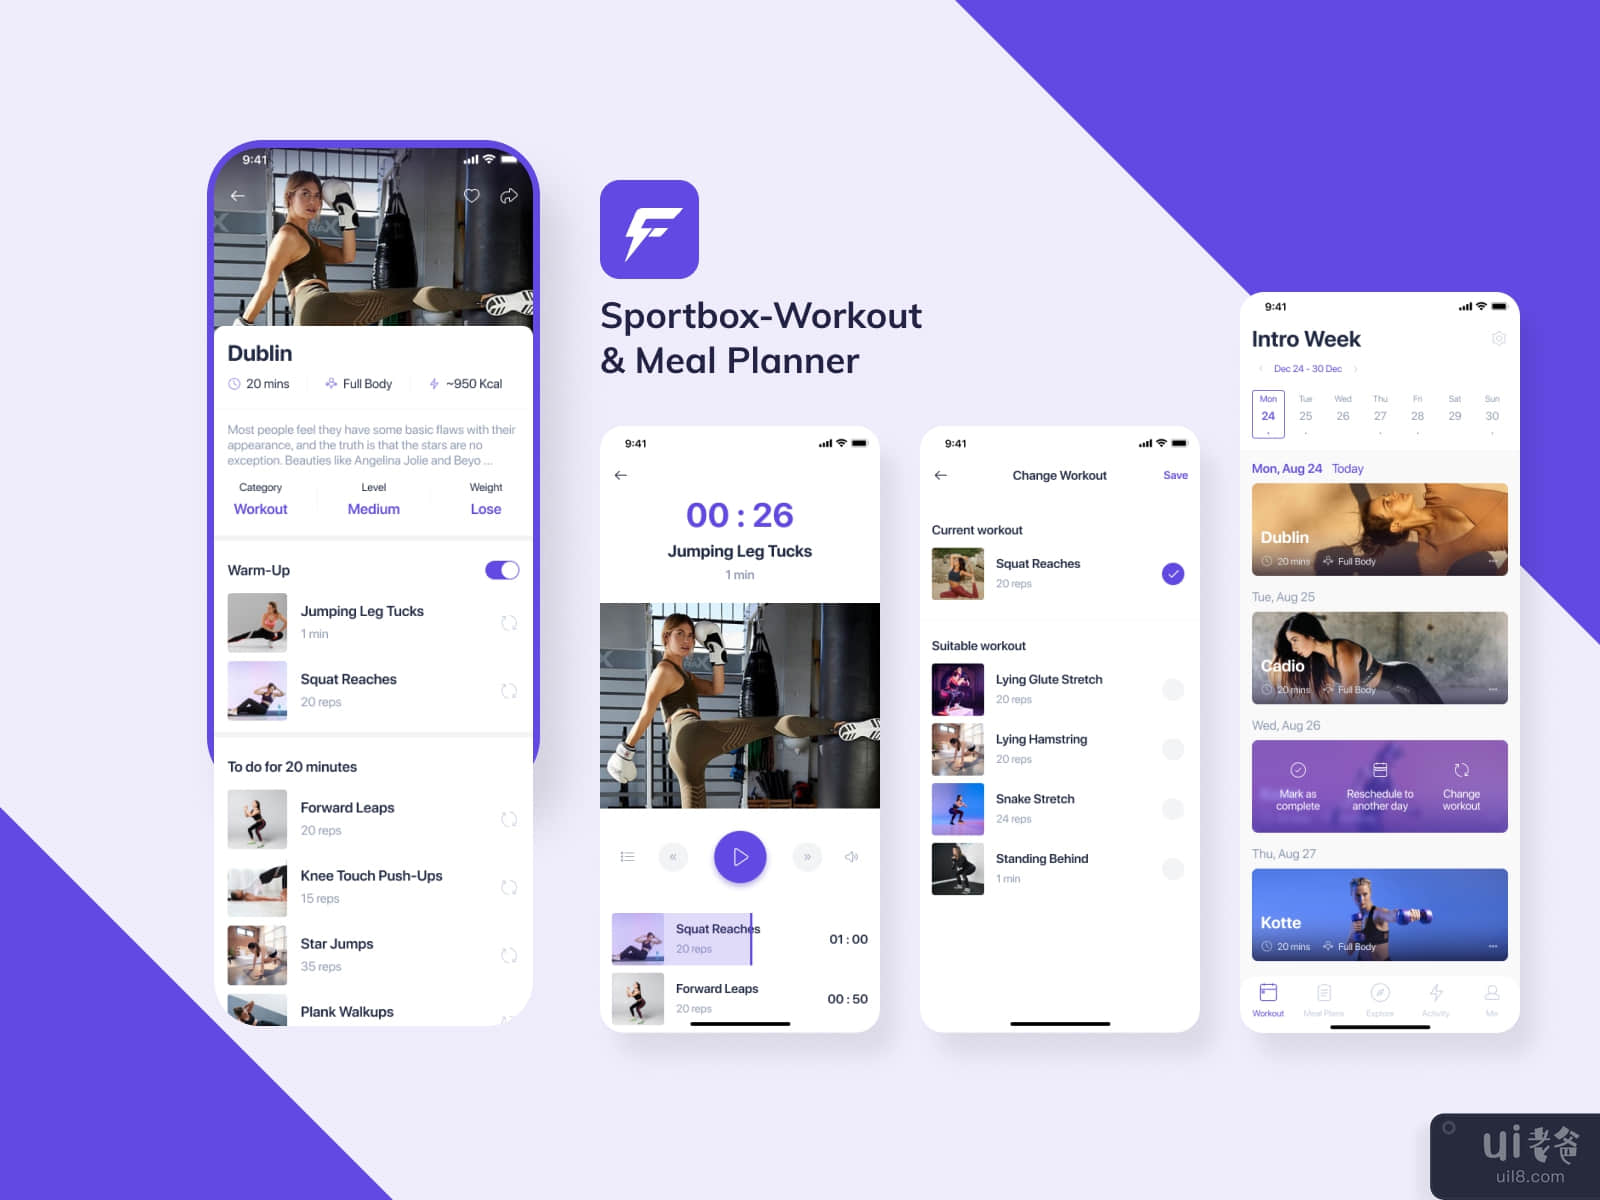 Sportbox - Workouts & Meal Planner UI Kit #2